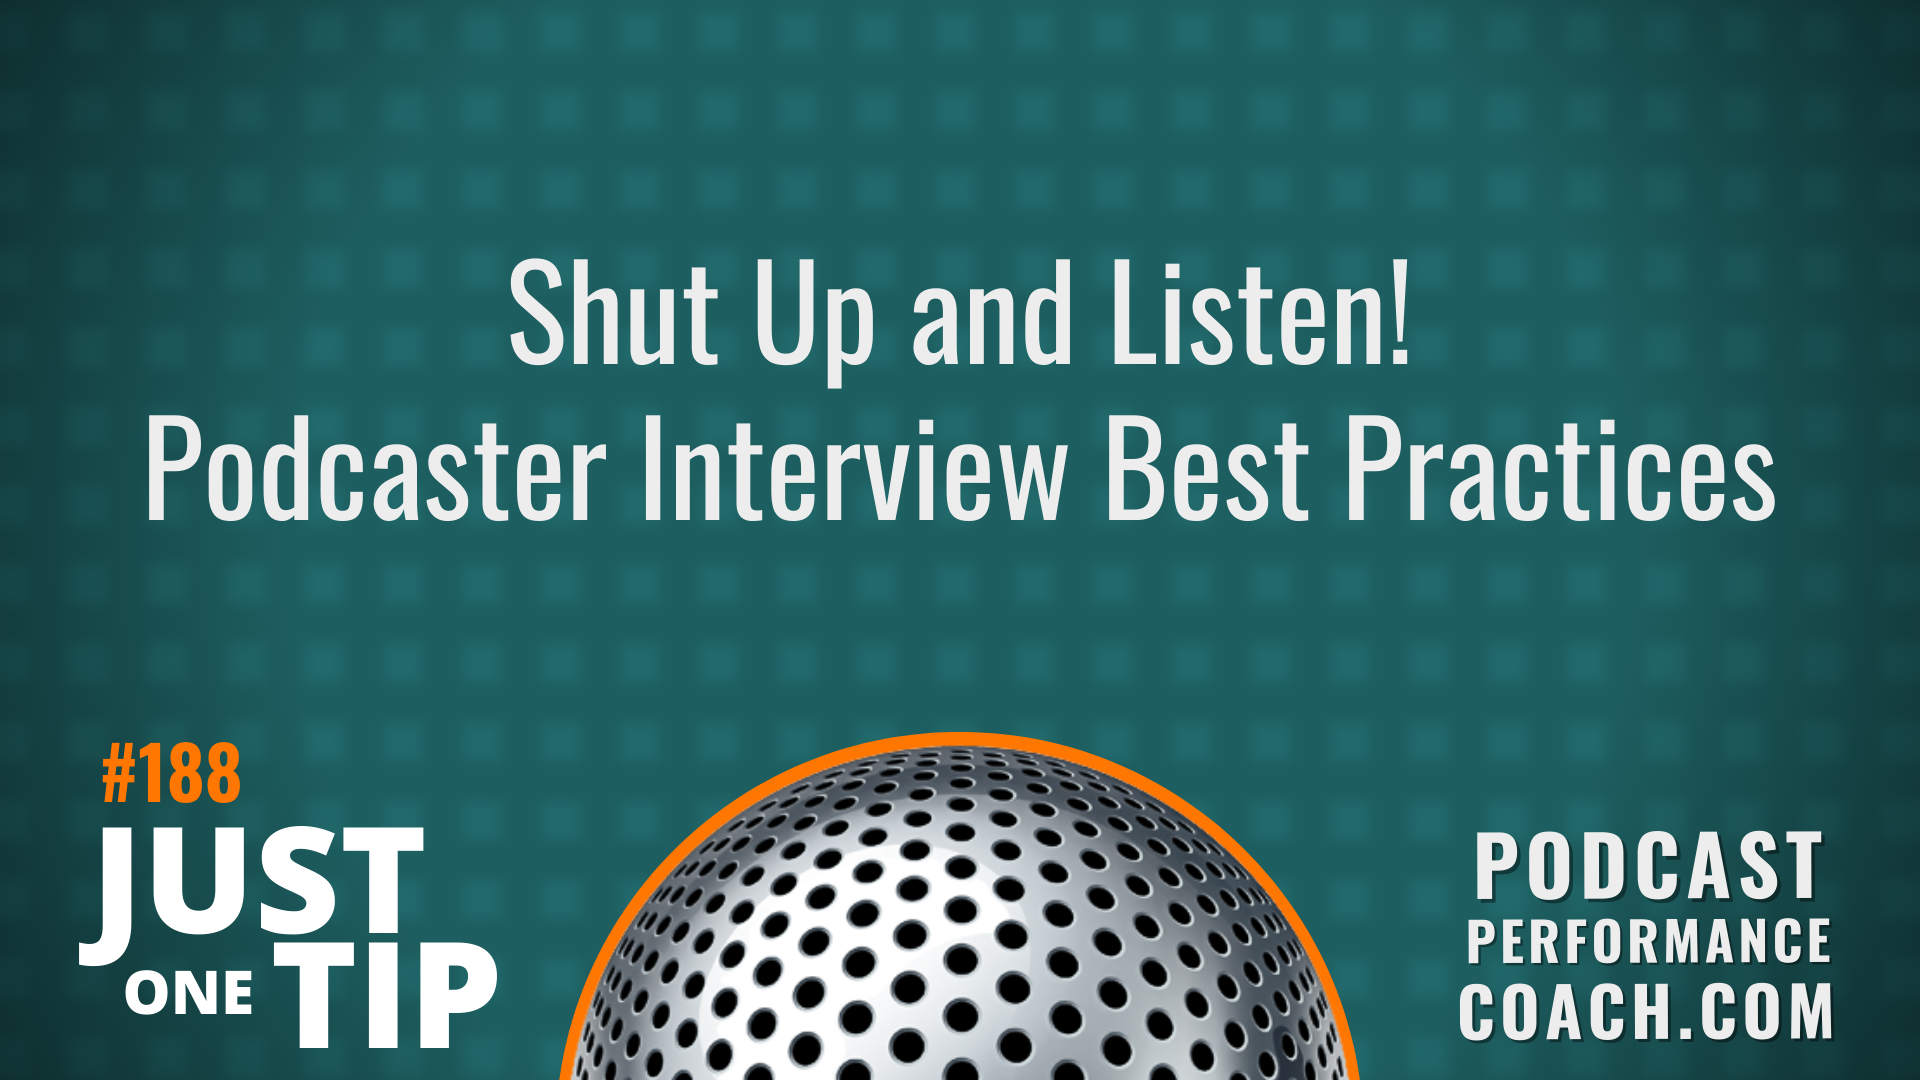 188 Shut Up and Listen – Podcaster Interview Best Practices